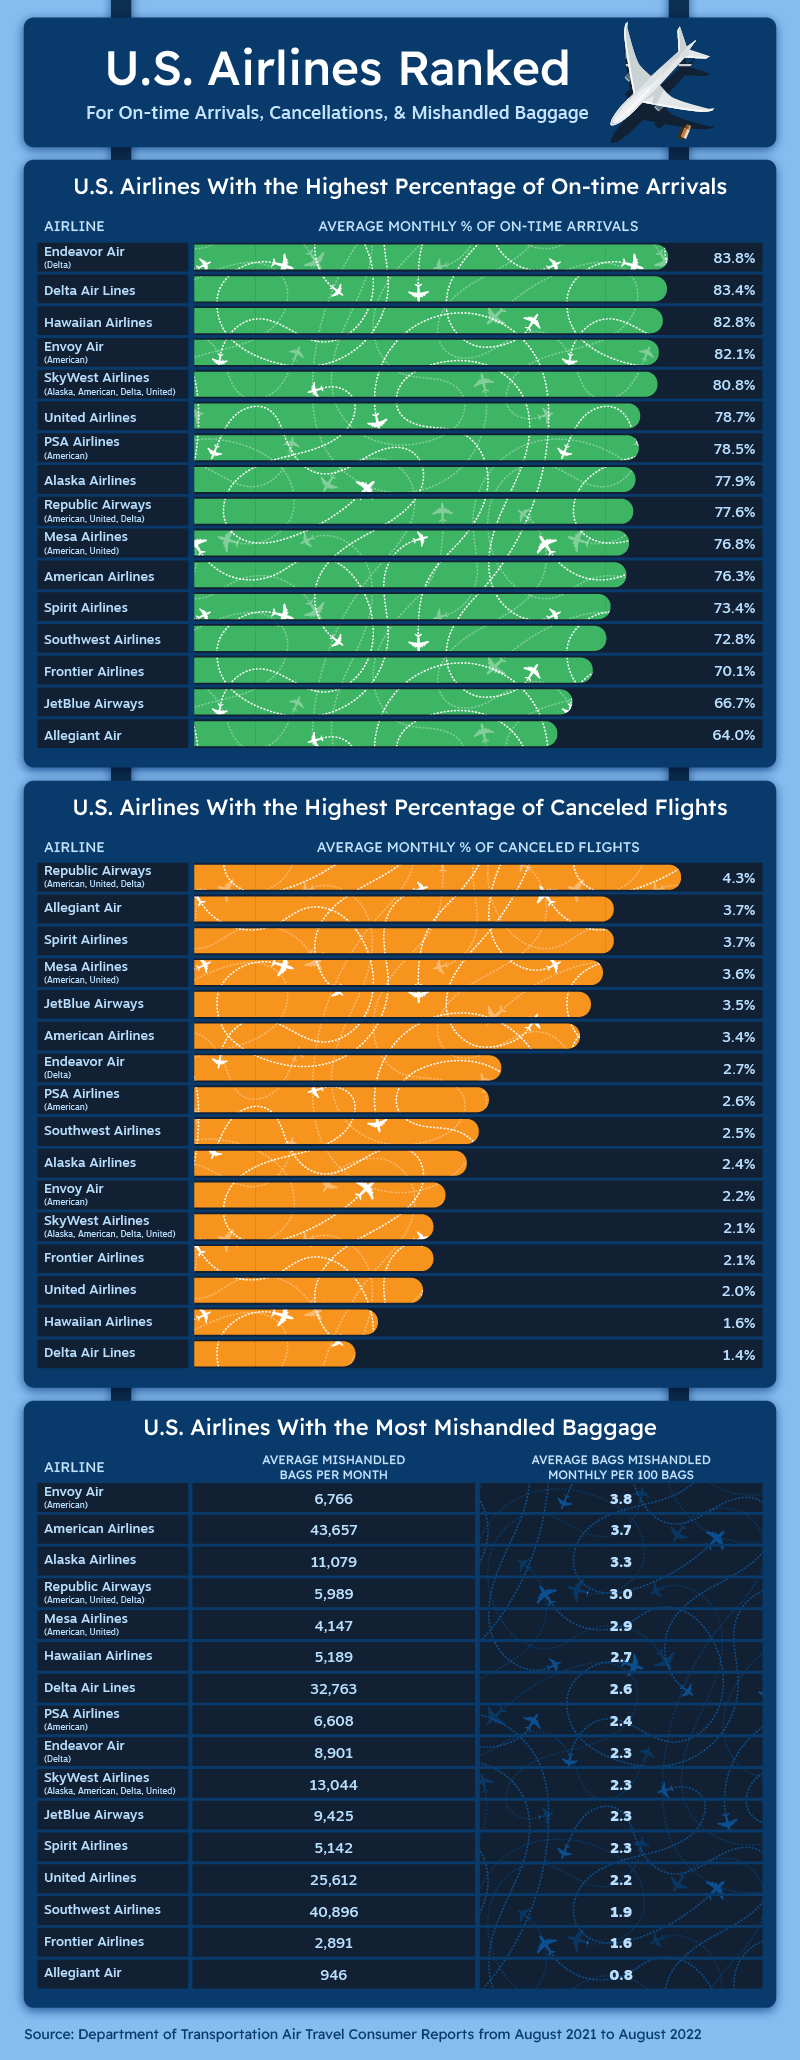 A graphic ranking U.S. airlines on arrival times, cancellations, and mishandled baggage